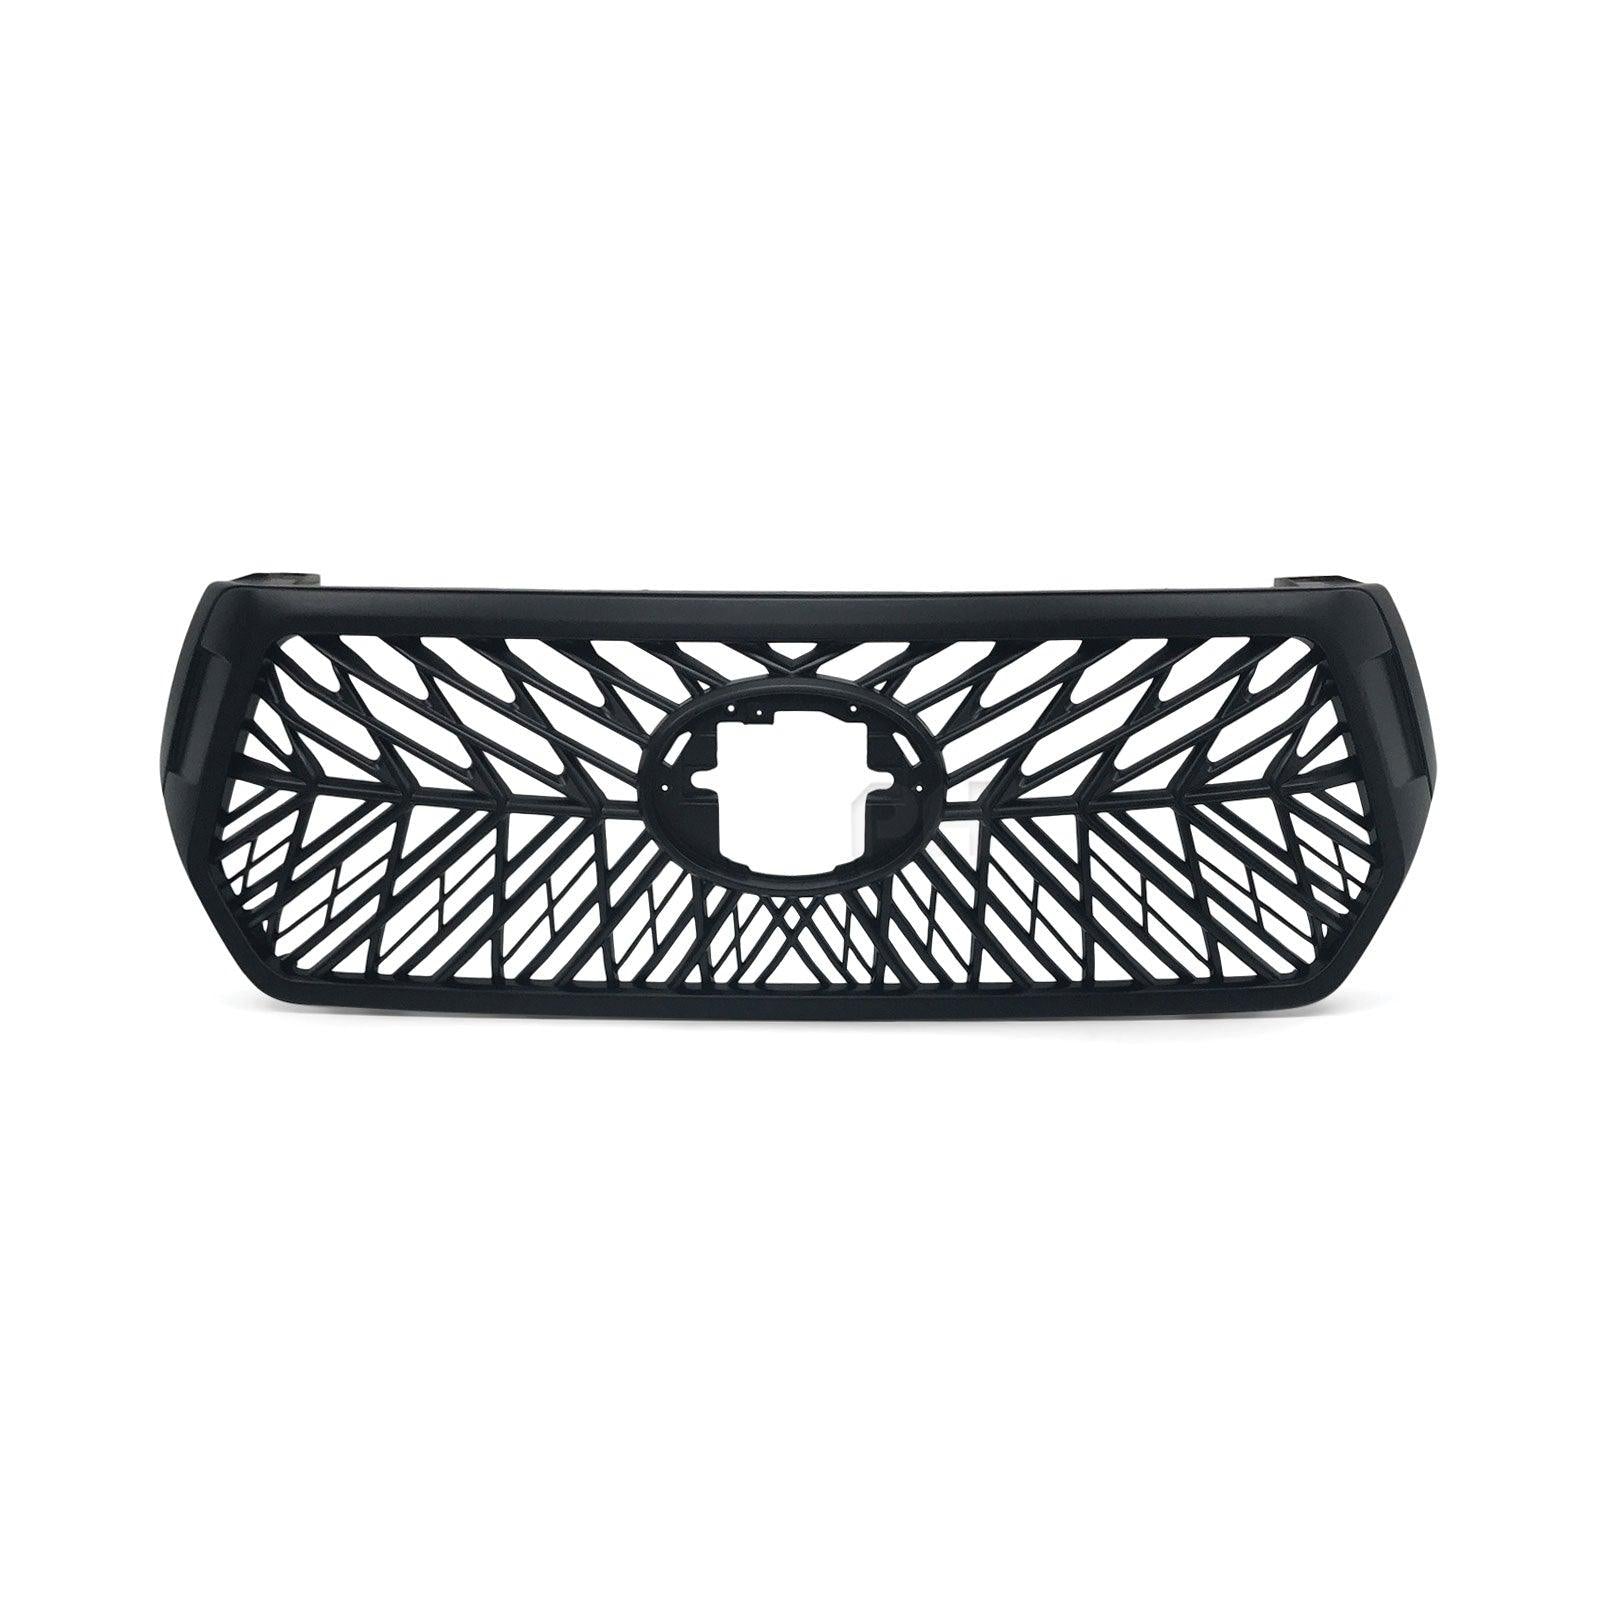 Grill Black Edition Upgrade Mesh Style Fits Toyota Hilux SR5 Rogue TRD 2018-2020 - 4X4OC™